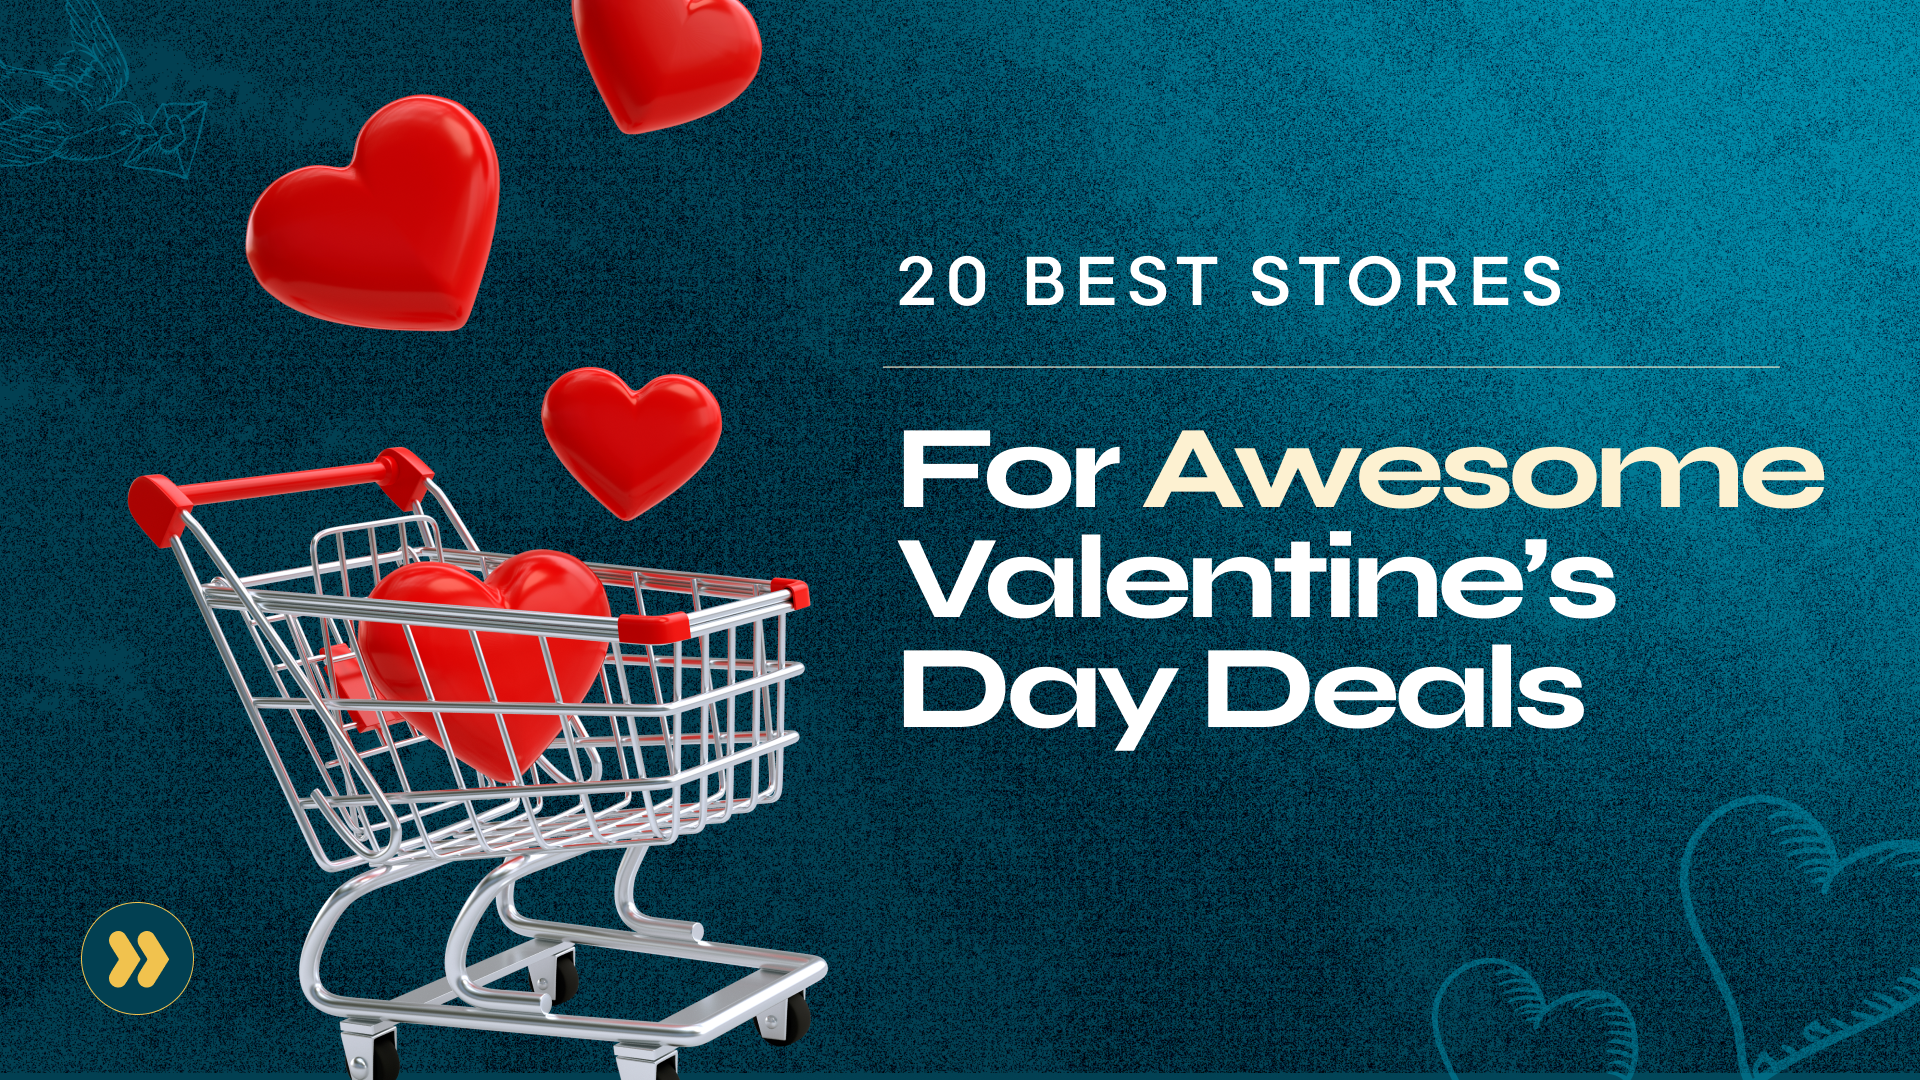 20 Best Stores for Awesome Valentine’s Day Deals